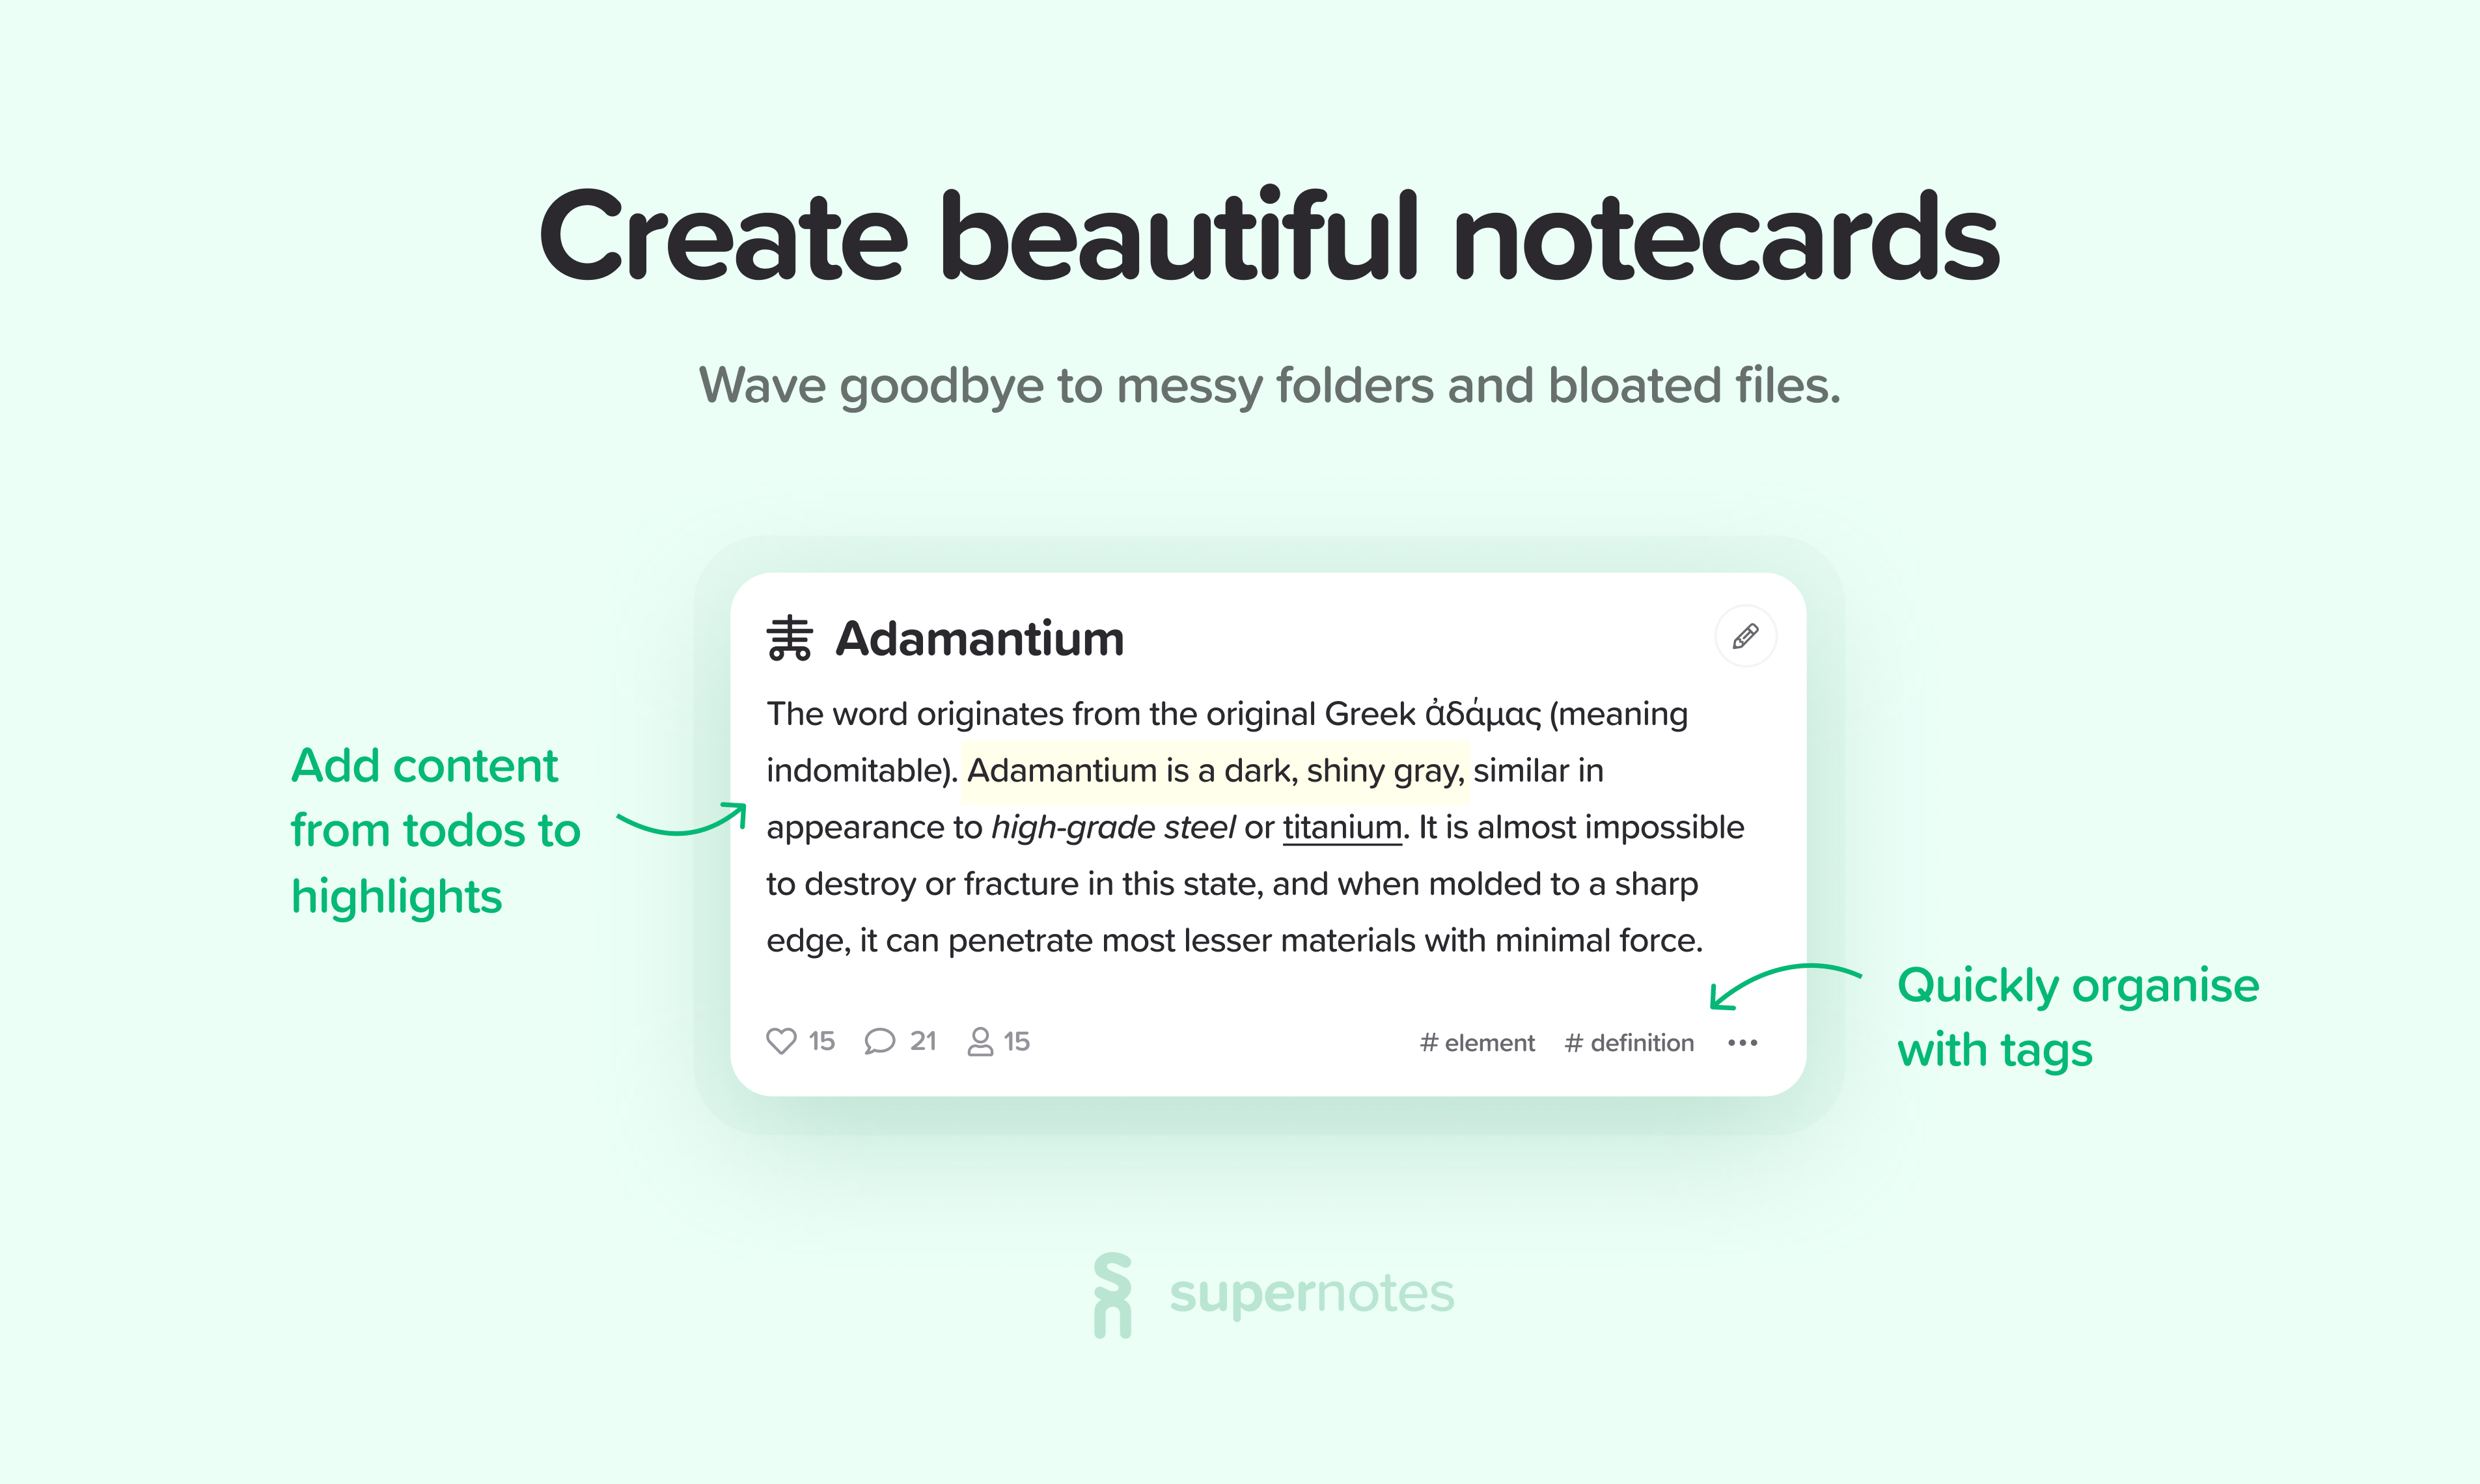 Get feedback from a vast remote working audience about Supernotes